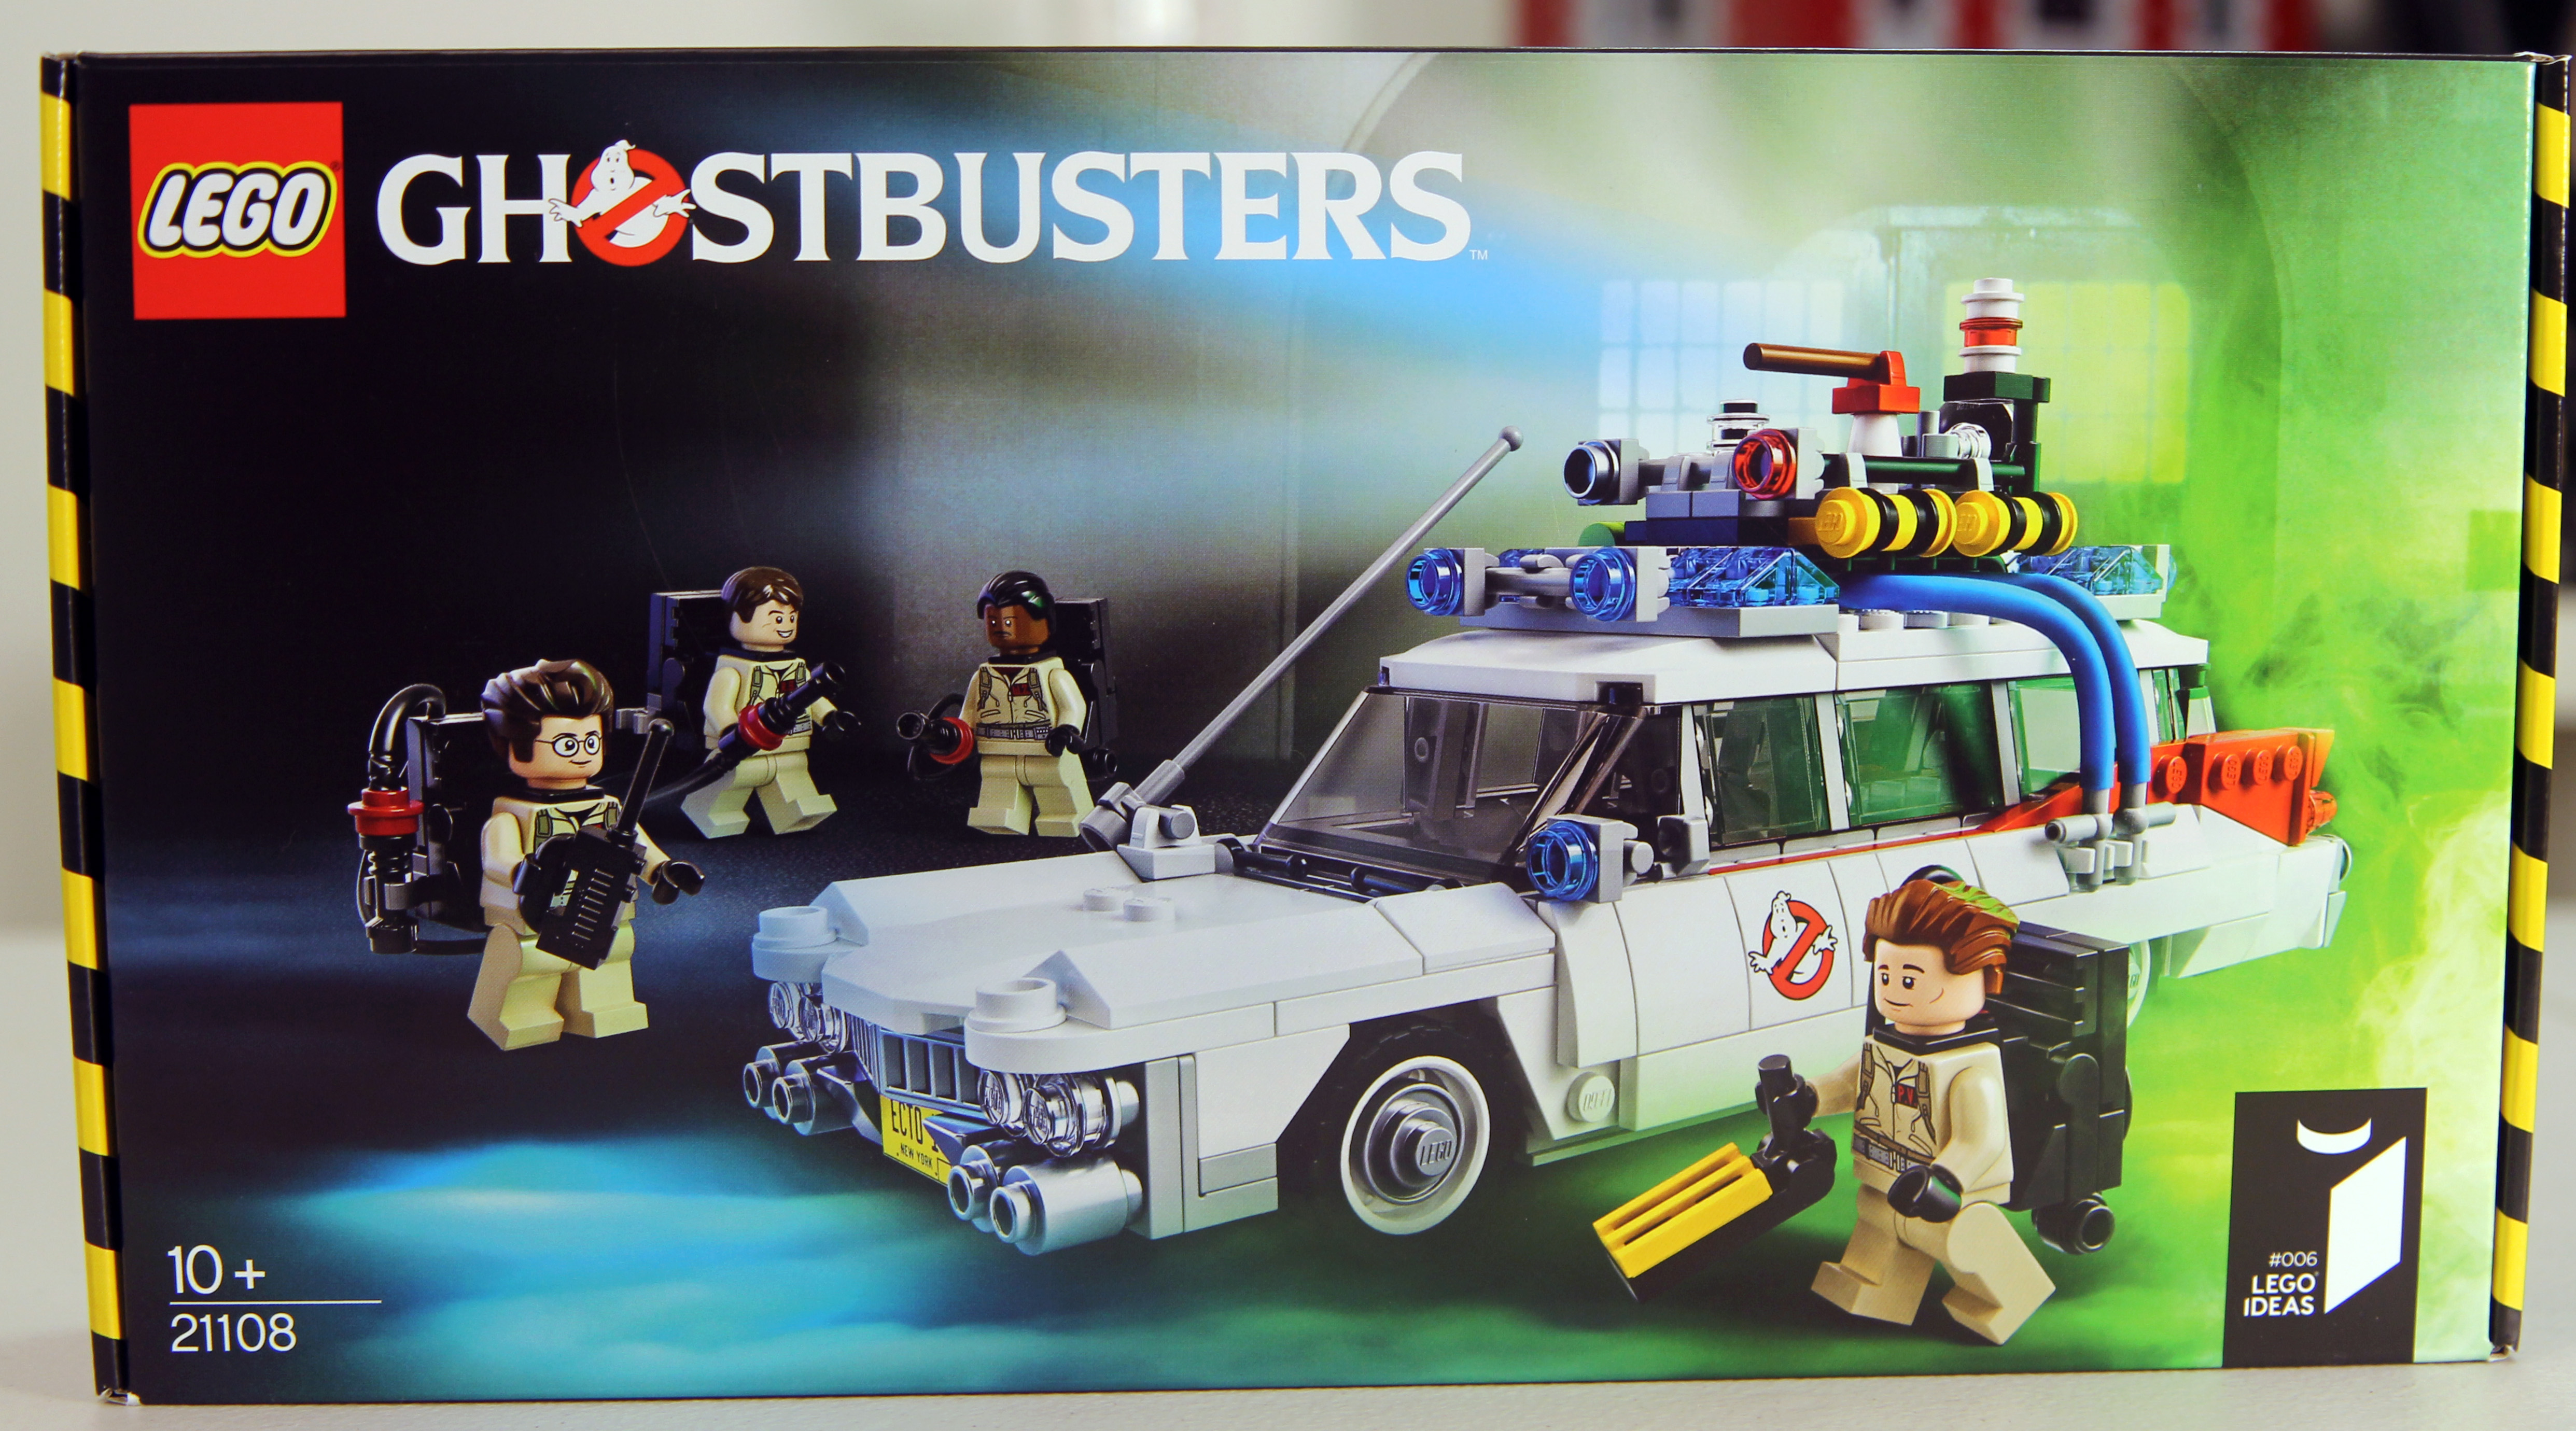 Lego Ghostbusters Cars LARGE VINYL WALL STICKER DECALS CHILDREN Room 134m 